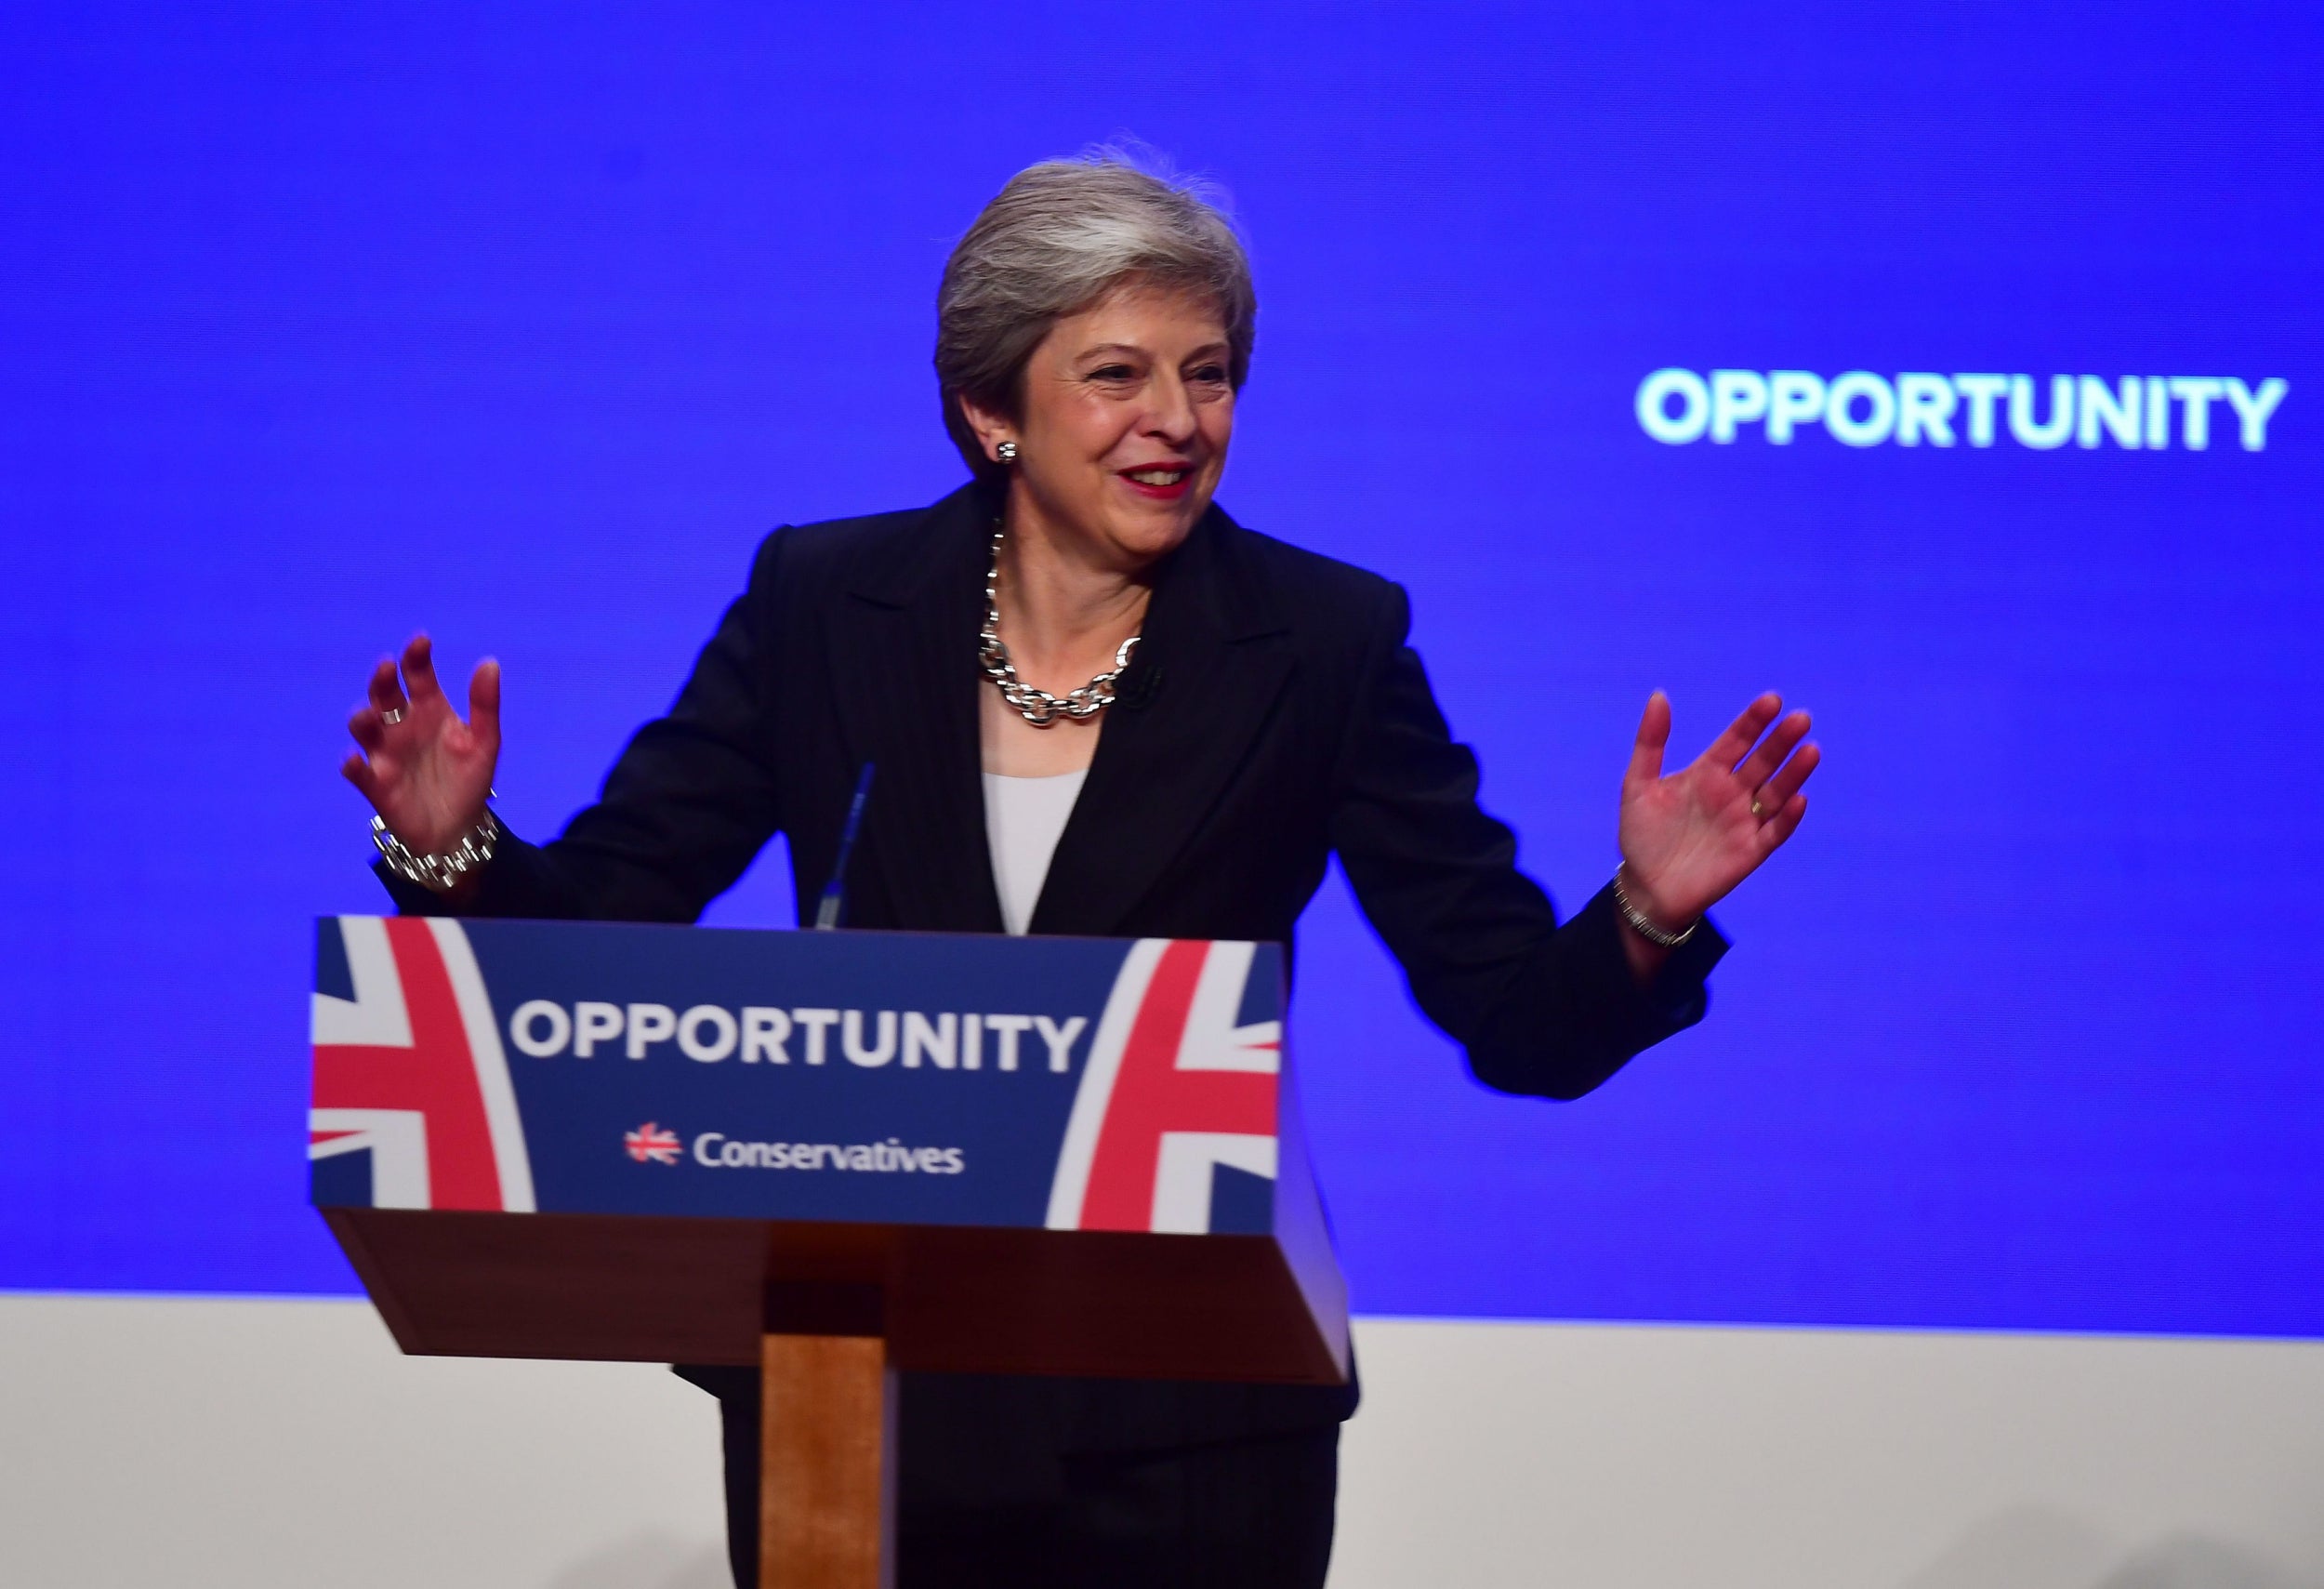 Theresa May pledged last October to end the Conservatives' austerity measures